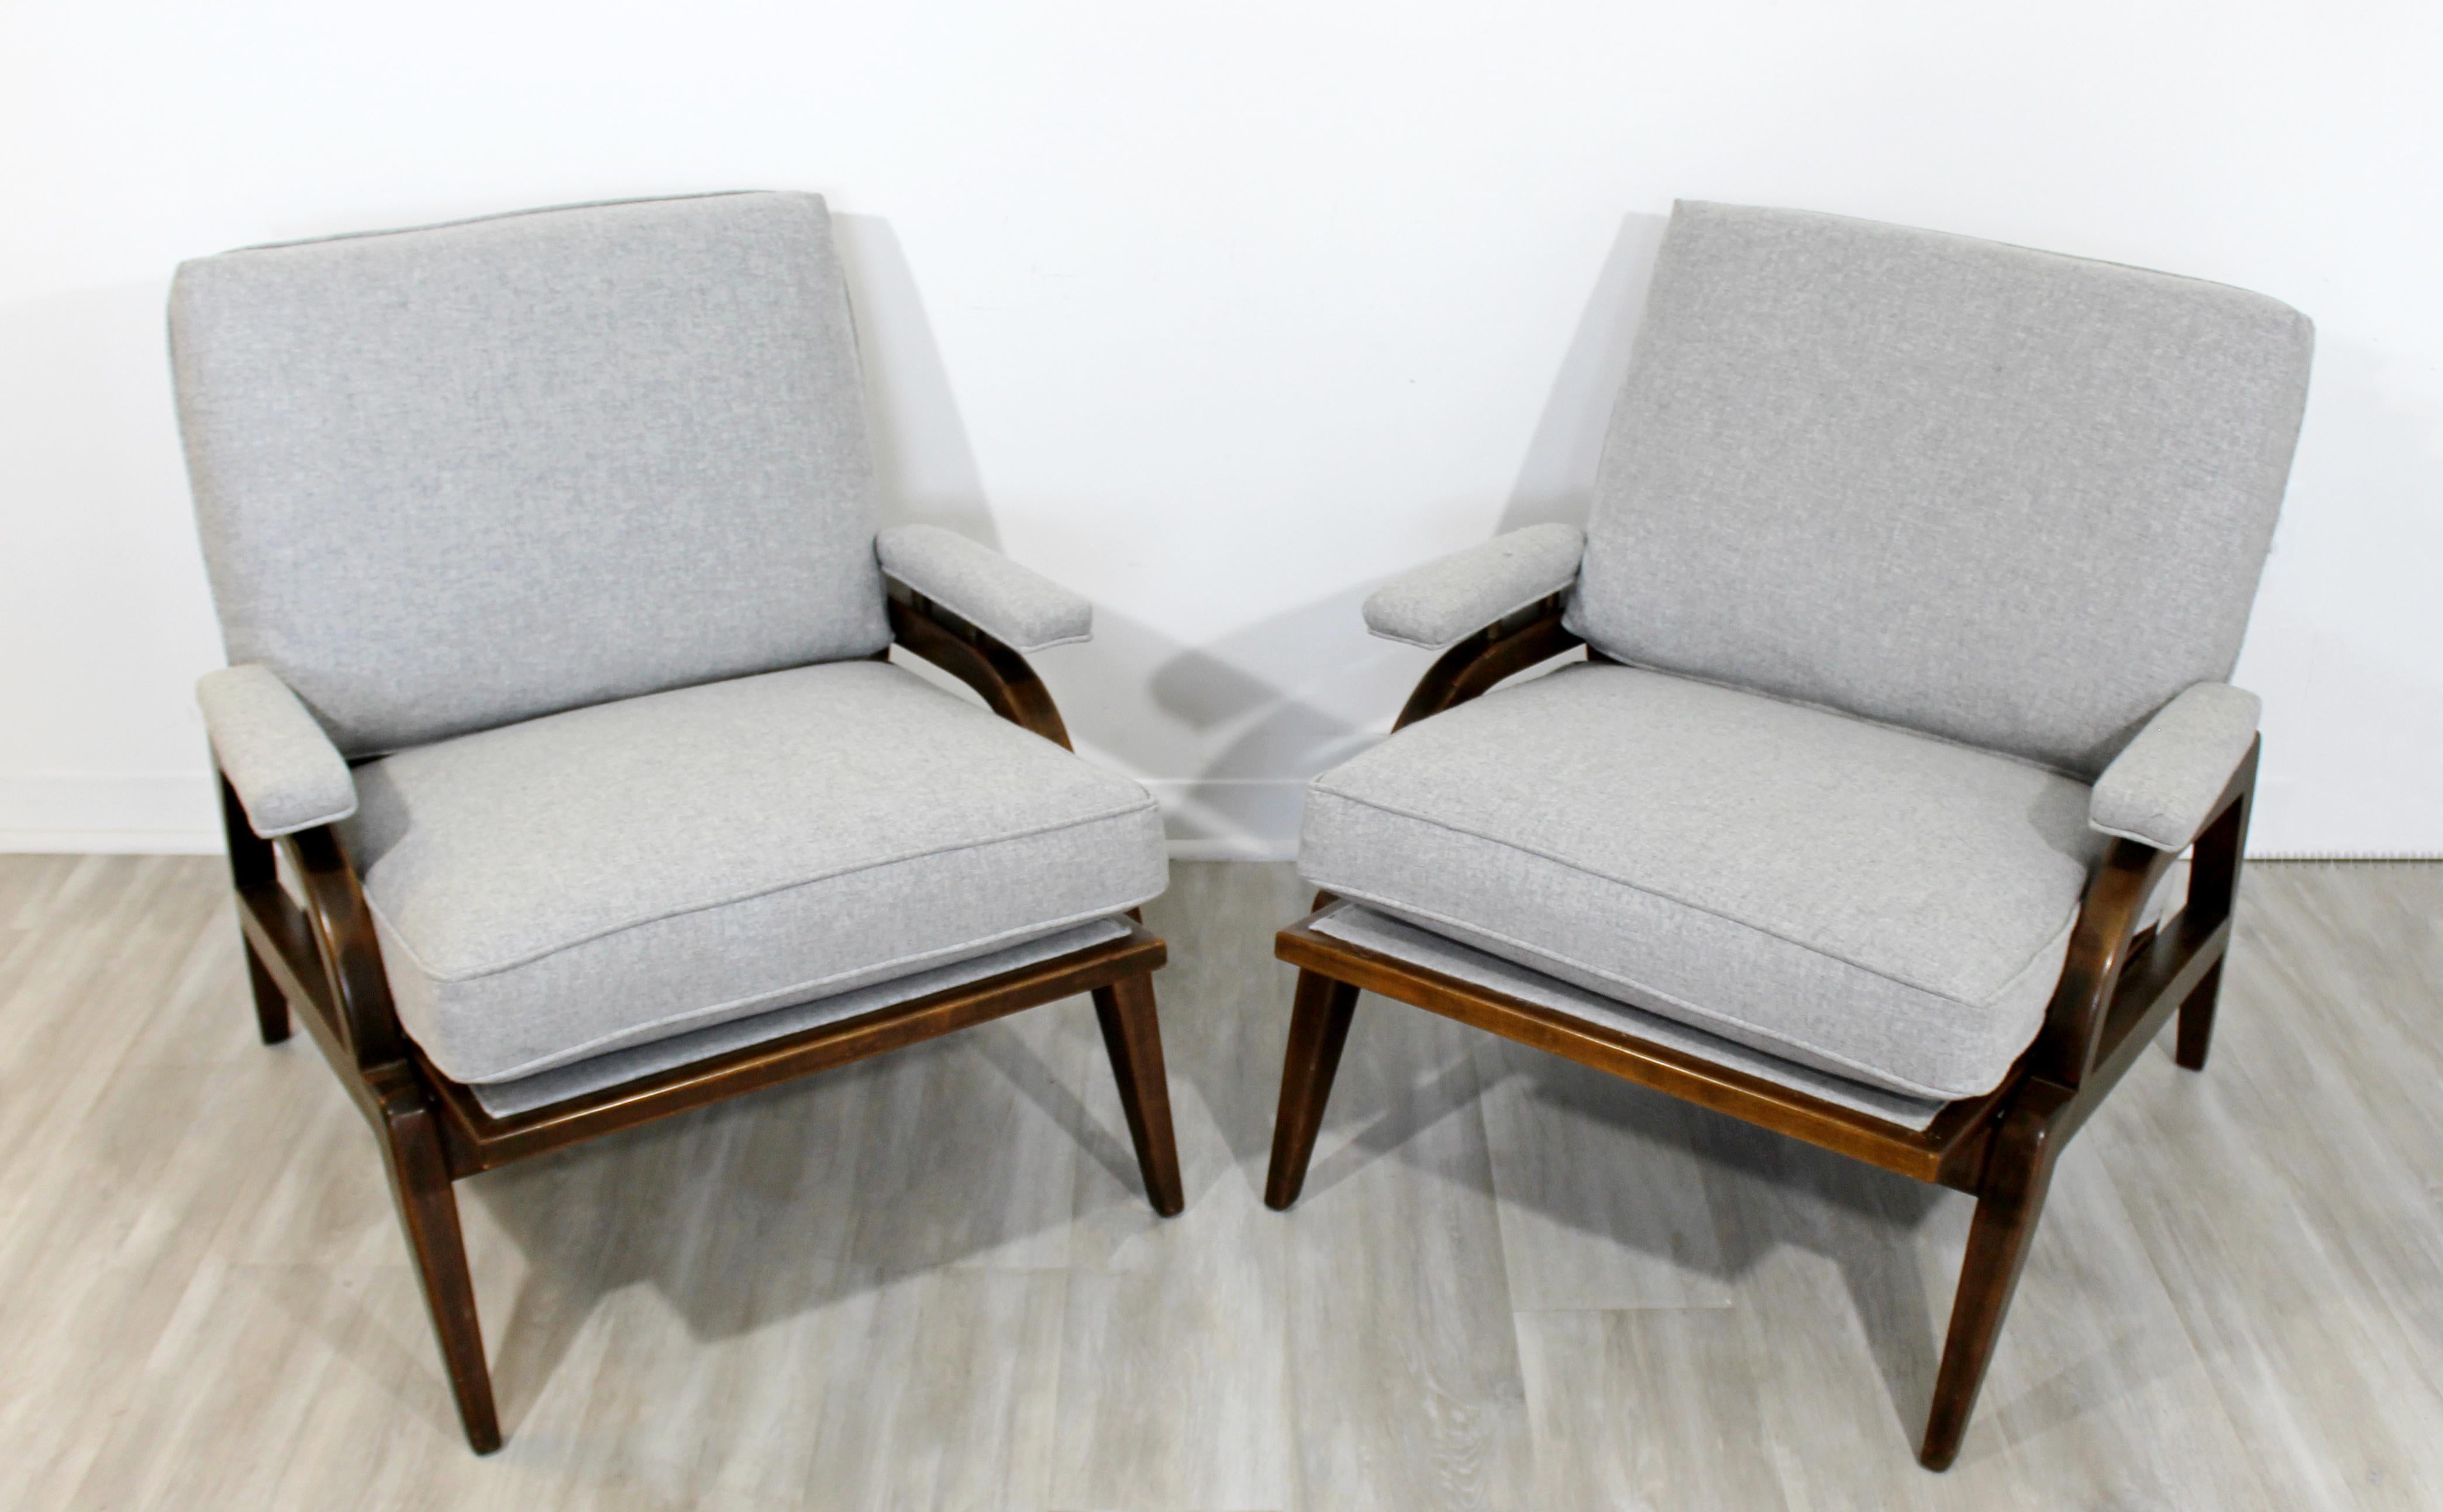 For your consideration is a phenomenal pair of wood armchairs, with delicately angled arms, in the style of Dunbar, circa 1960s. In excellent vintage condition. The dimensions are 29